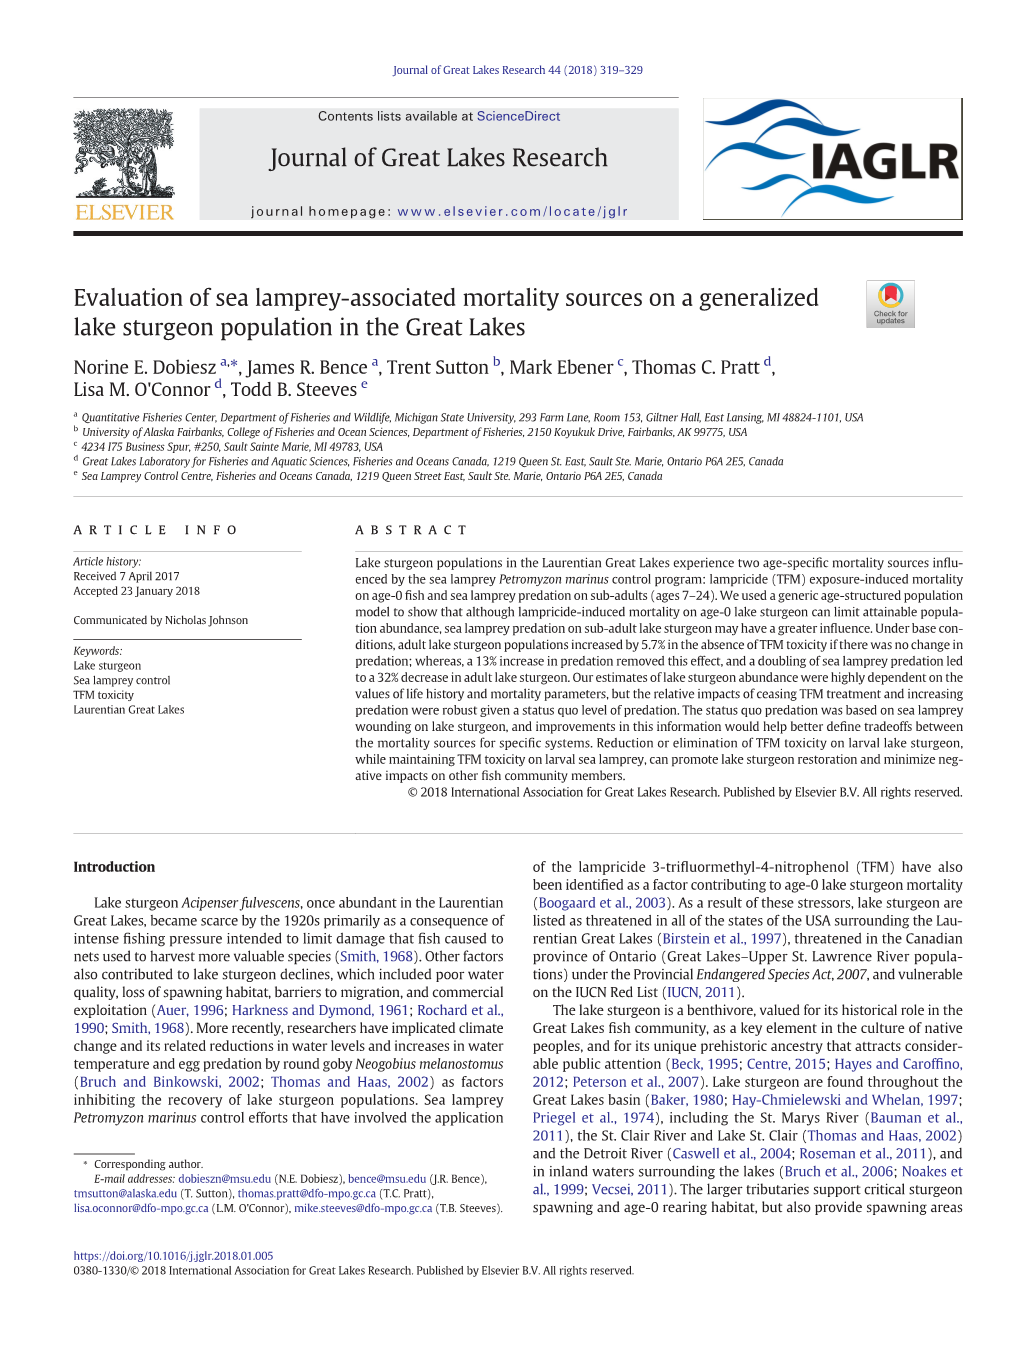 Evaluation of Sea Lamprey-Associated Mortality Sources on a Generalized Lake Sturgeon Population in the Great Lakes